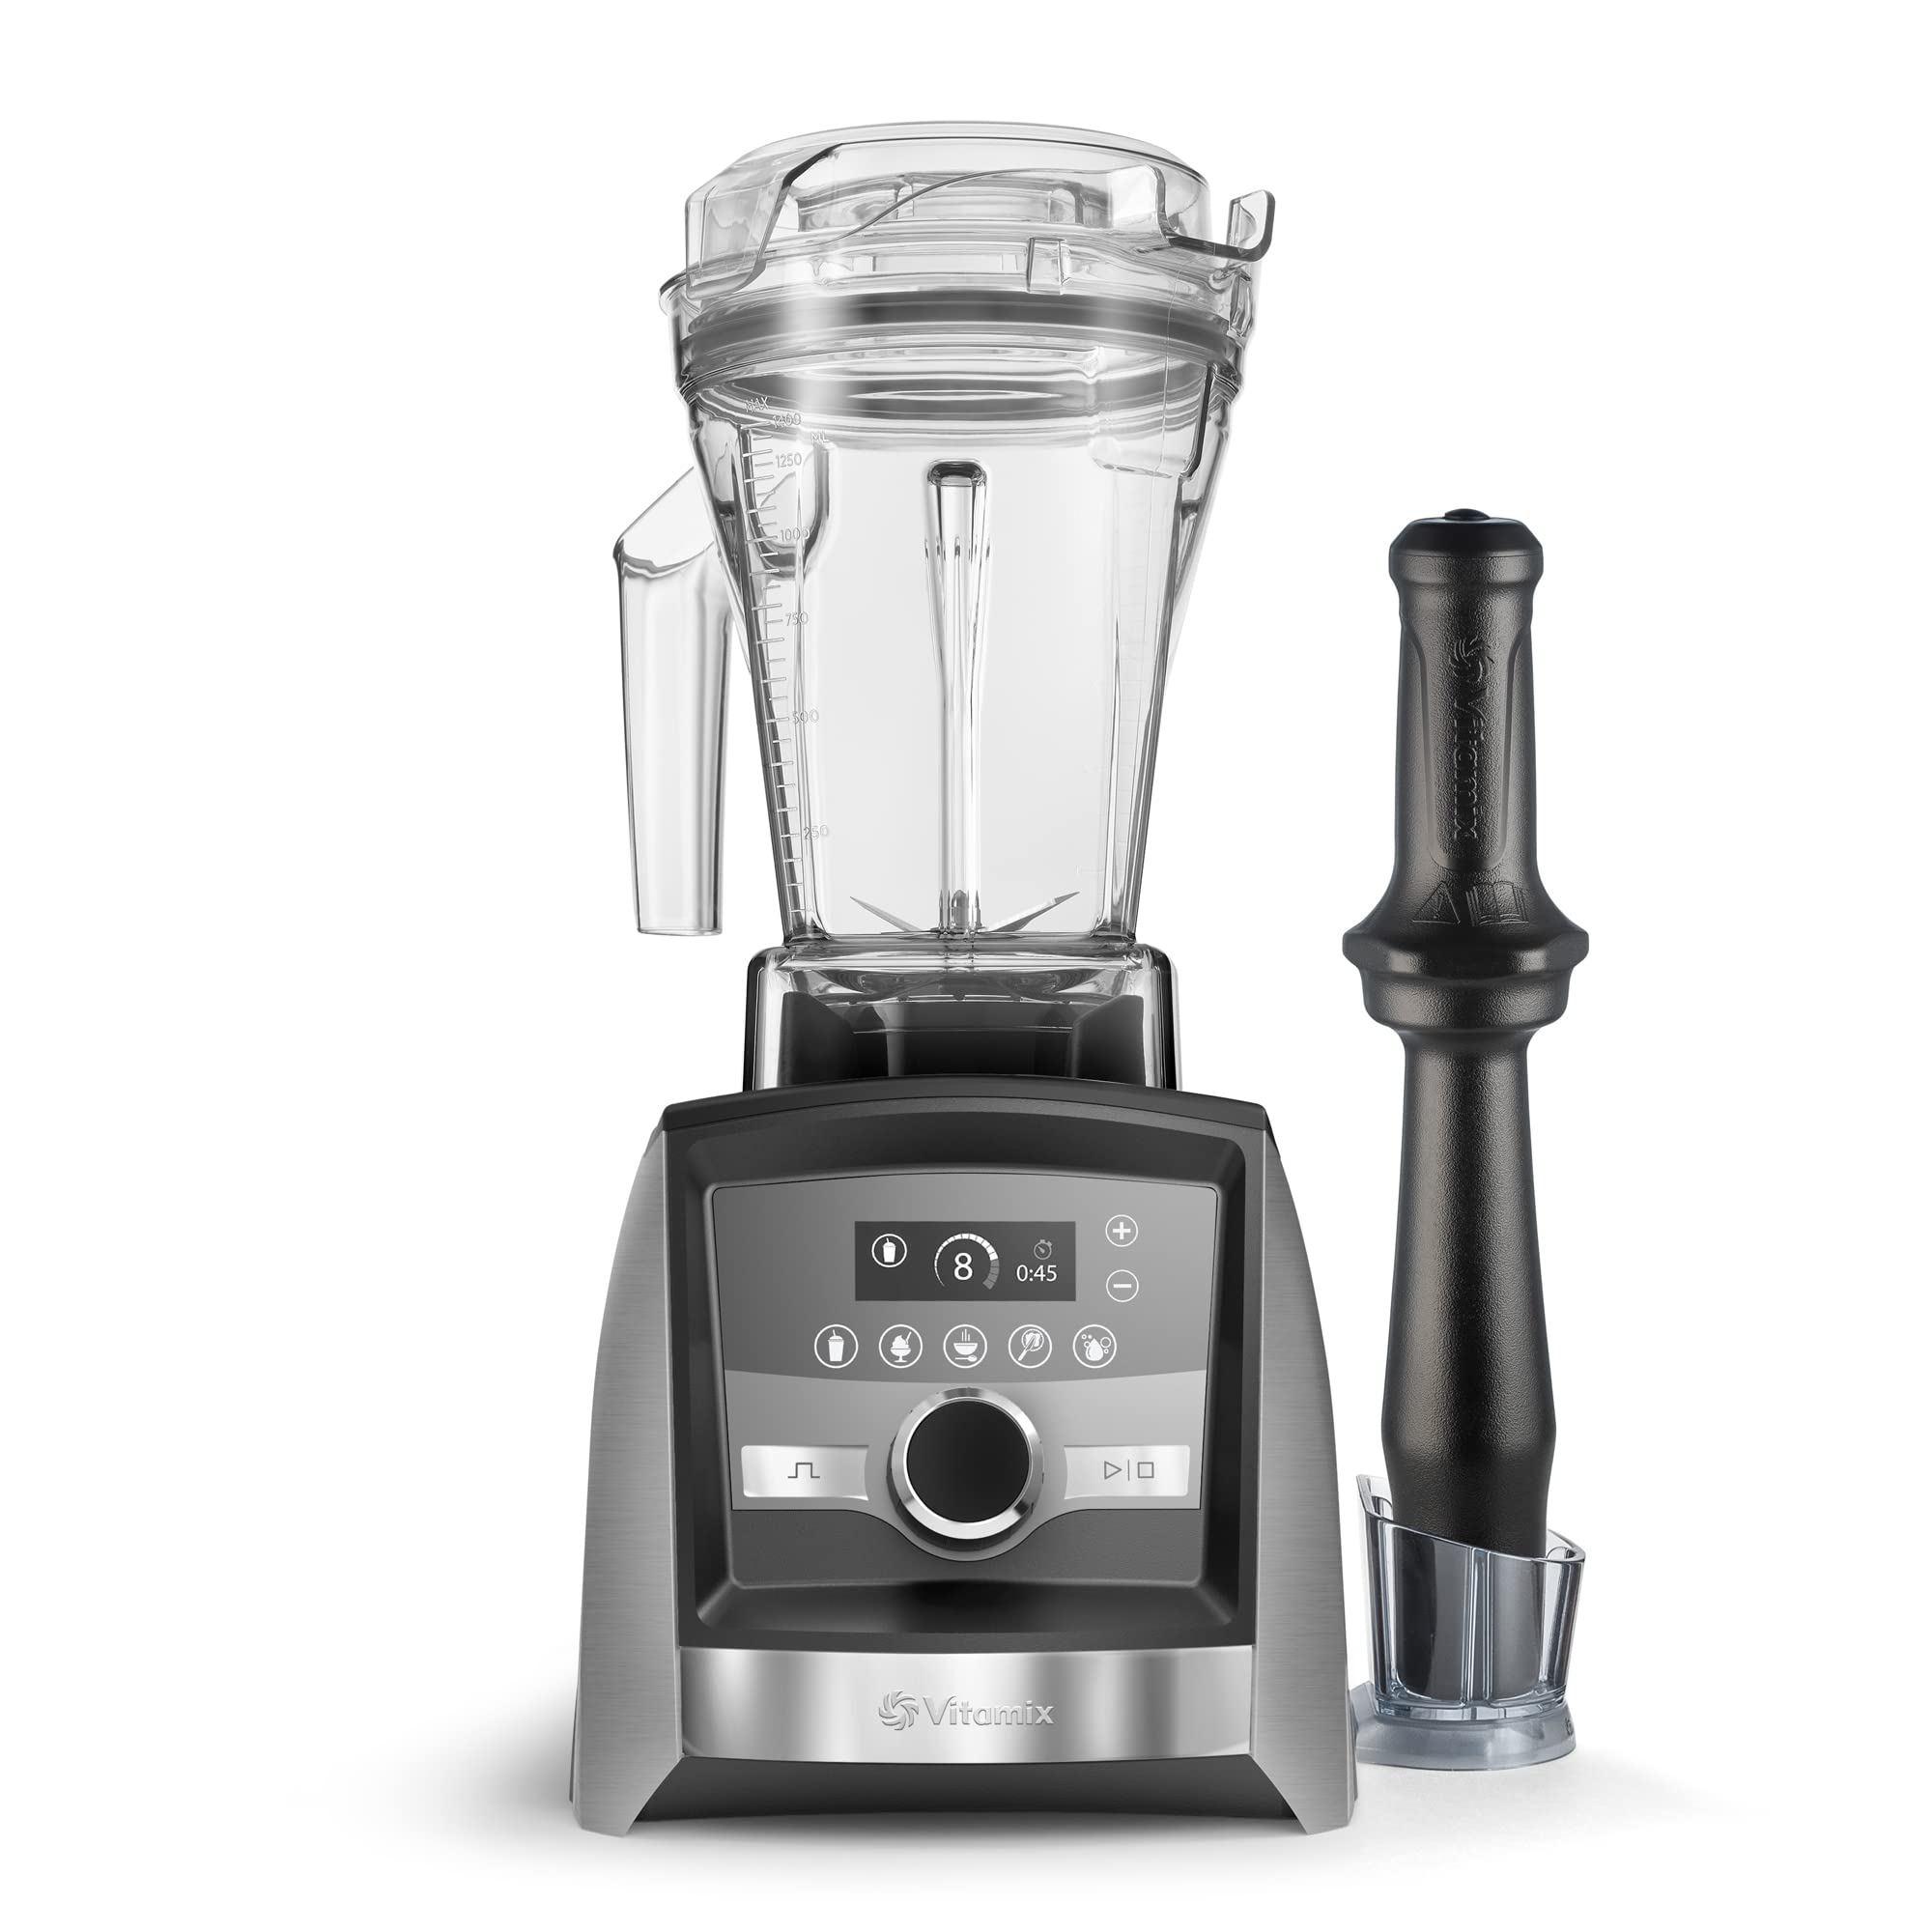 Vitamix Stopped Working Burning Smell: Troubleshooting Tips and Solutions